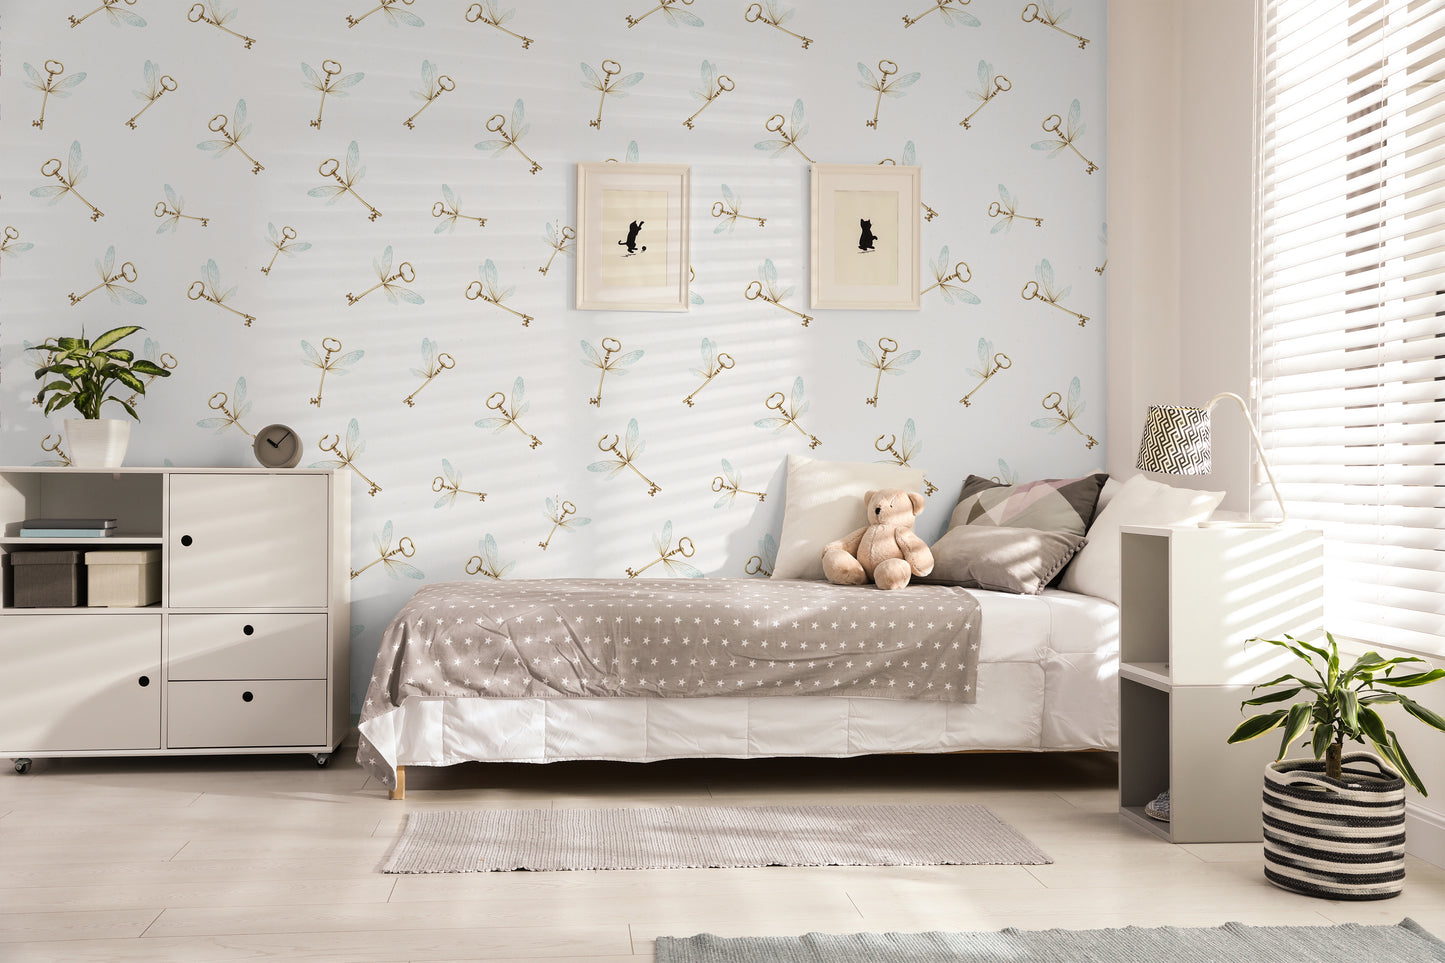 Flying Keys Removable Peel And Stick Wizardly Wallpaper in blue